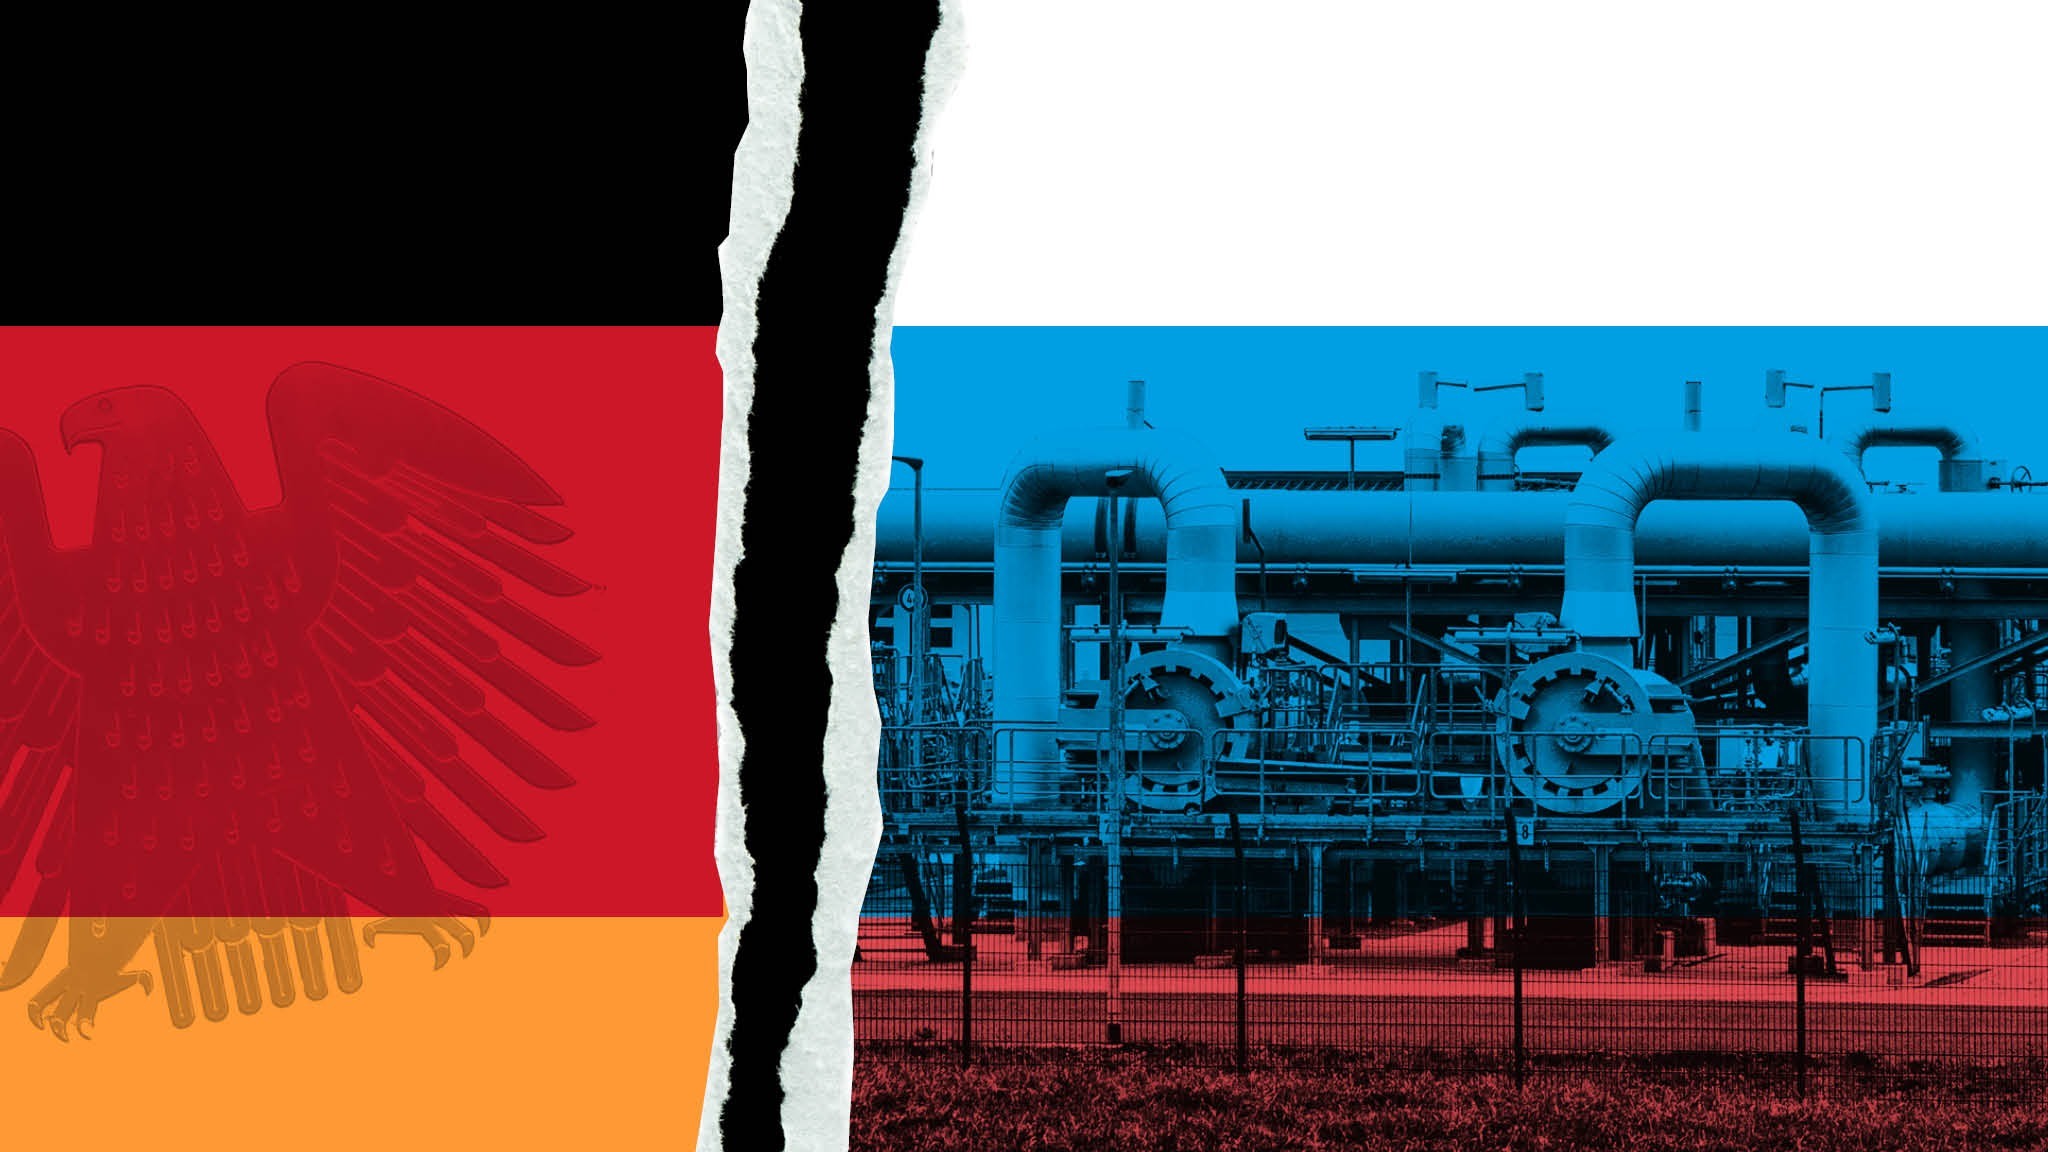 Germany in search of solutions to reduce its dependence on Russian gas